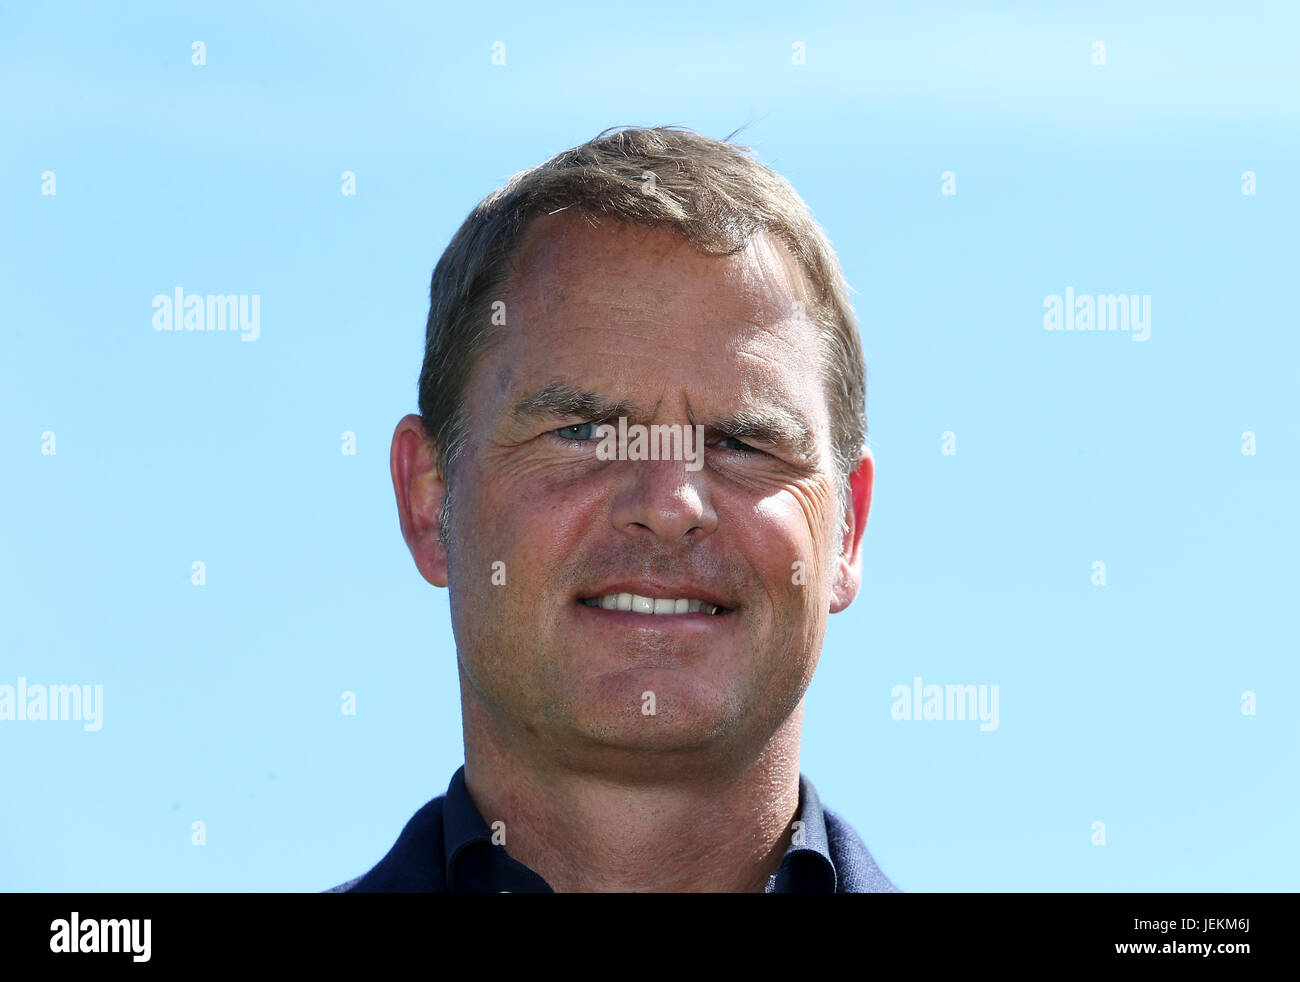 New Crystal Palace Manager Frank De Boer during the press conference at Beckenham Training Ground, Kent. PRESS ASSOCIATION Photo. Picture date: Monday June 26, 2017. See PA story SOCCER Palace. Photo credit should read: Steven Paston/PA Wire. RESTRICTIONS: No use with unauthorised audio, video, data, fixture lists, club/league logos or 'live' services. Online in-match use limited to 75 images, no video emulation. No use in betting, games or single club/league/player publications. Stock Photo